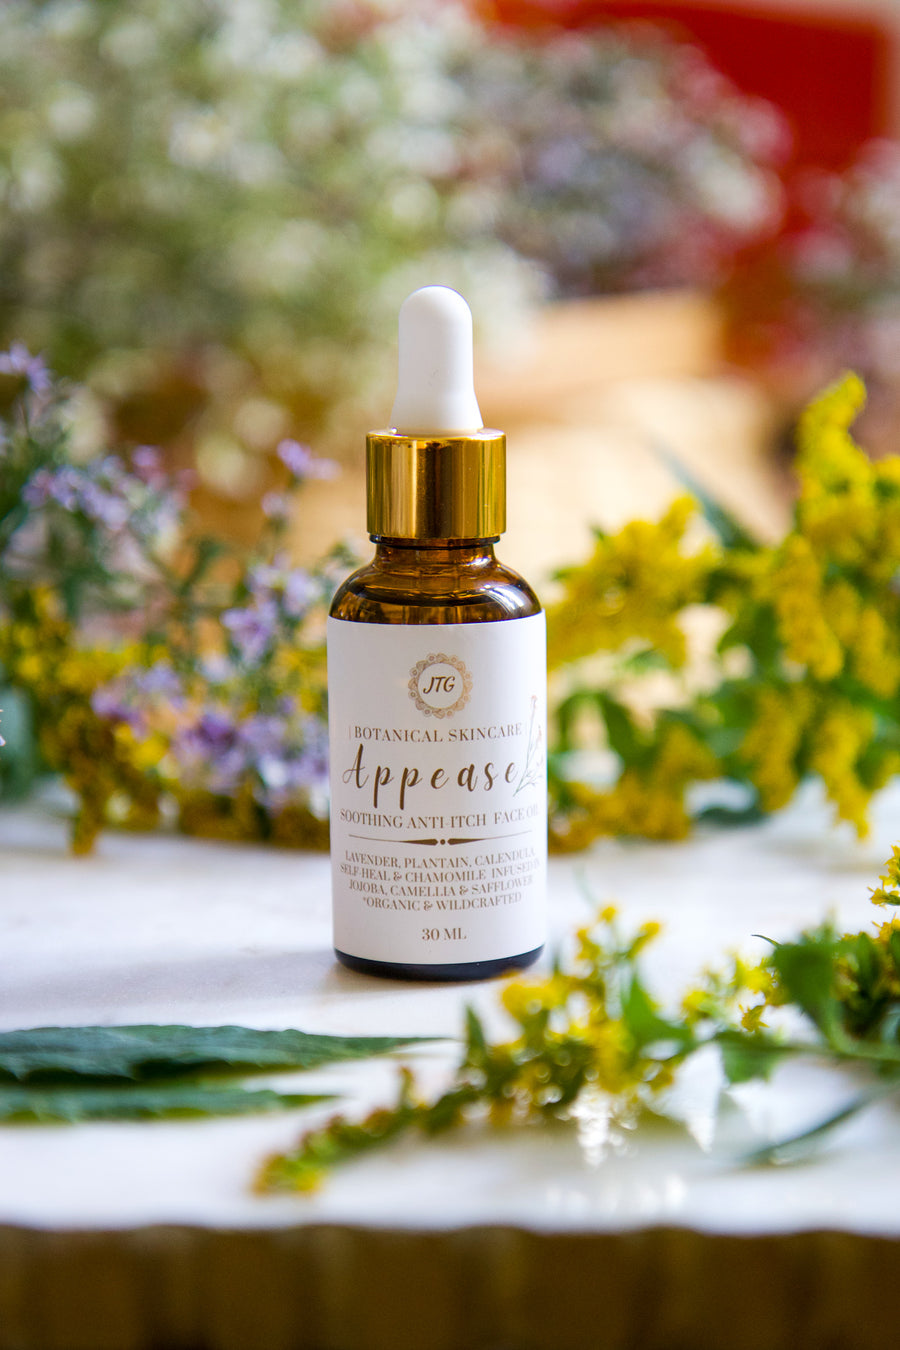 Appease After-Sun + Anti-Itch Face Oil